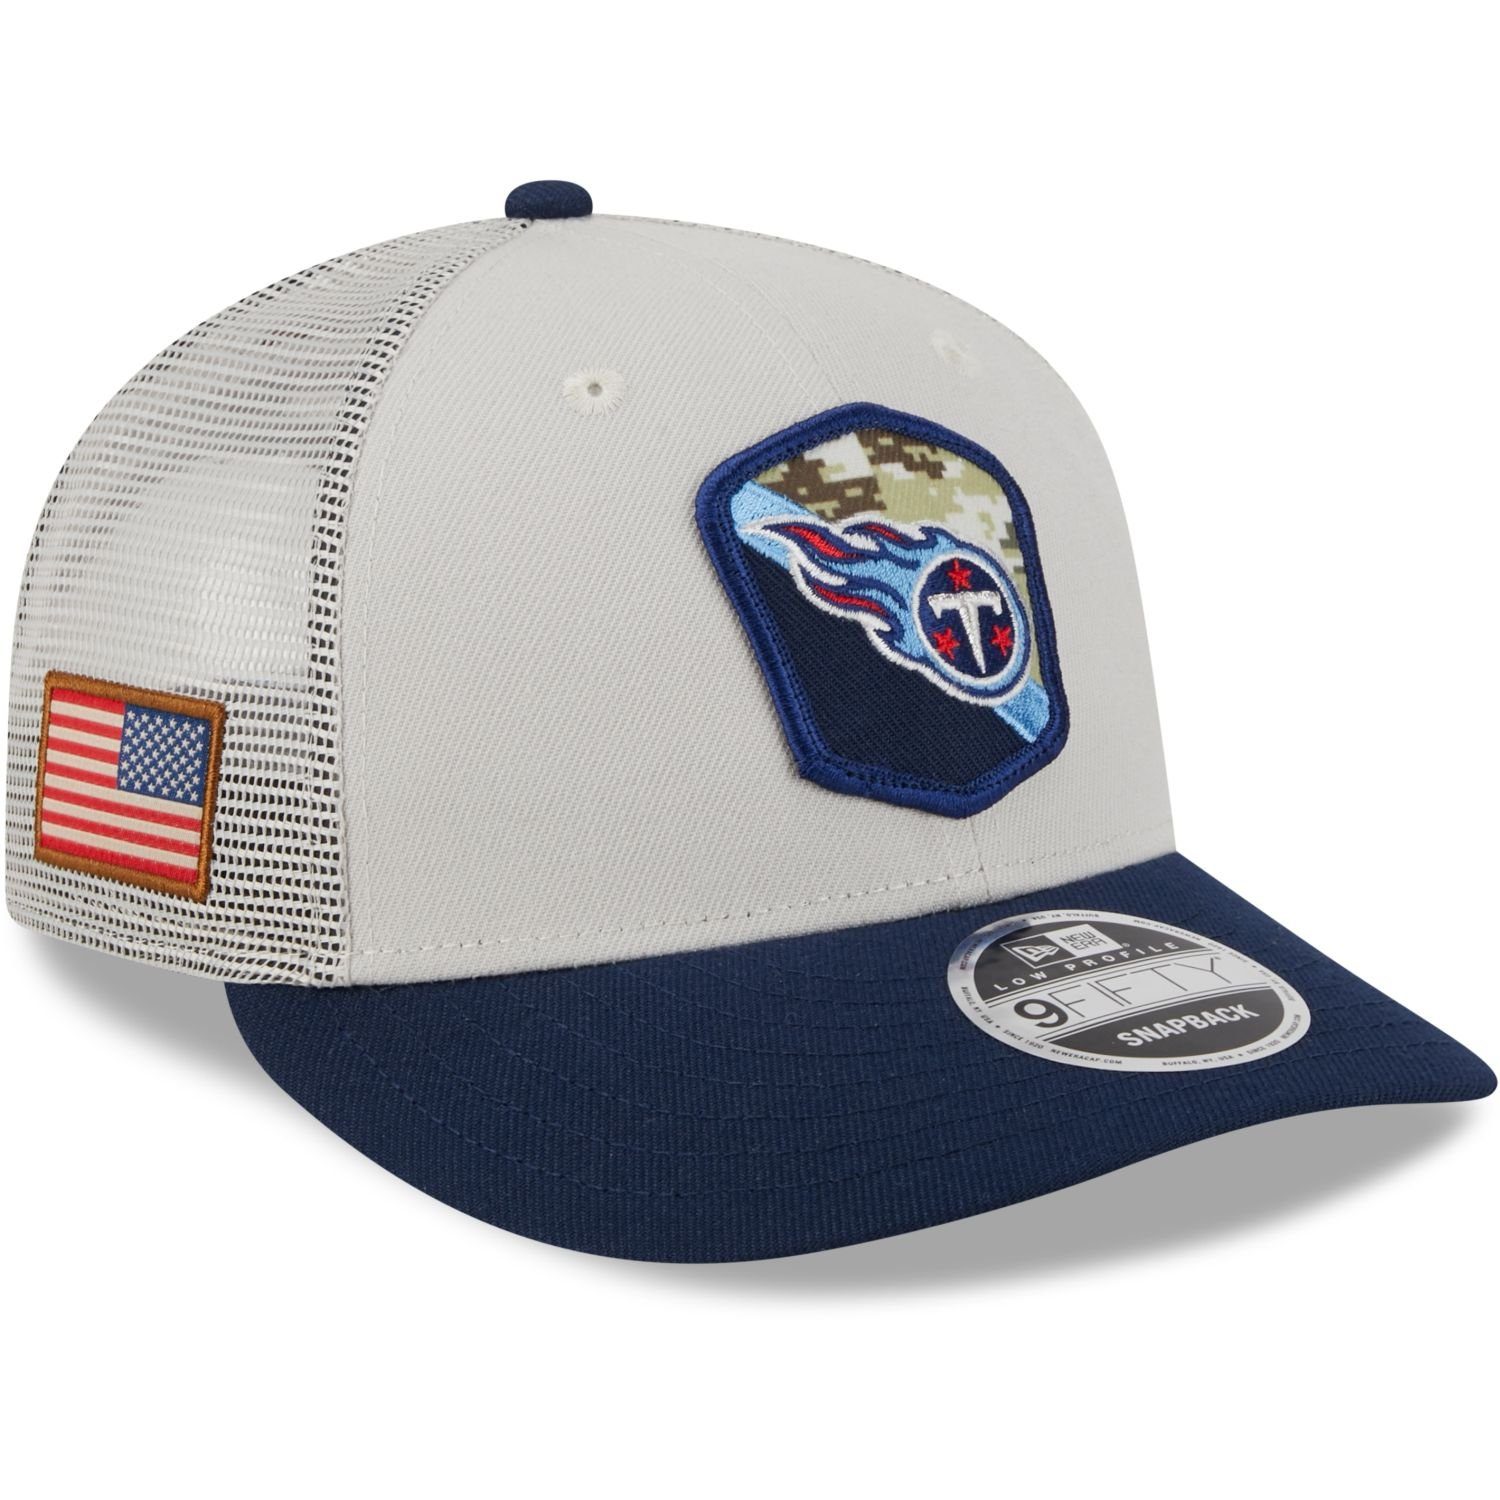 Profile Era Low Salute New Snap 9Fifty to Titans Service Tennessee NFL Cap Snapback